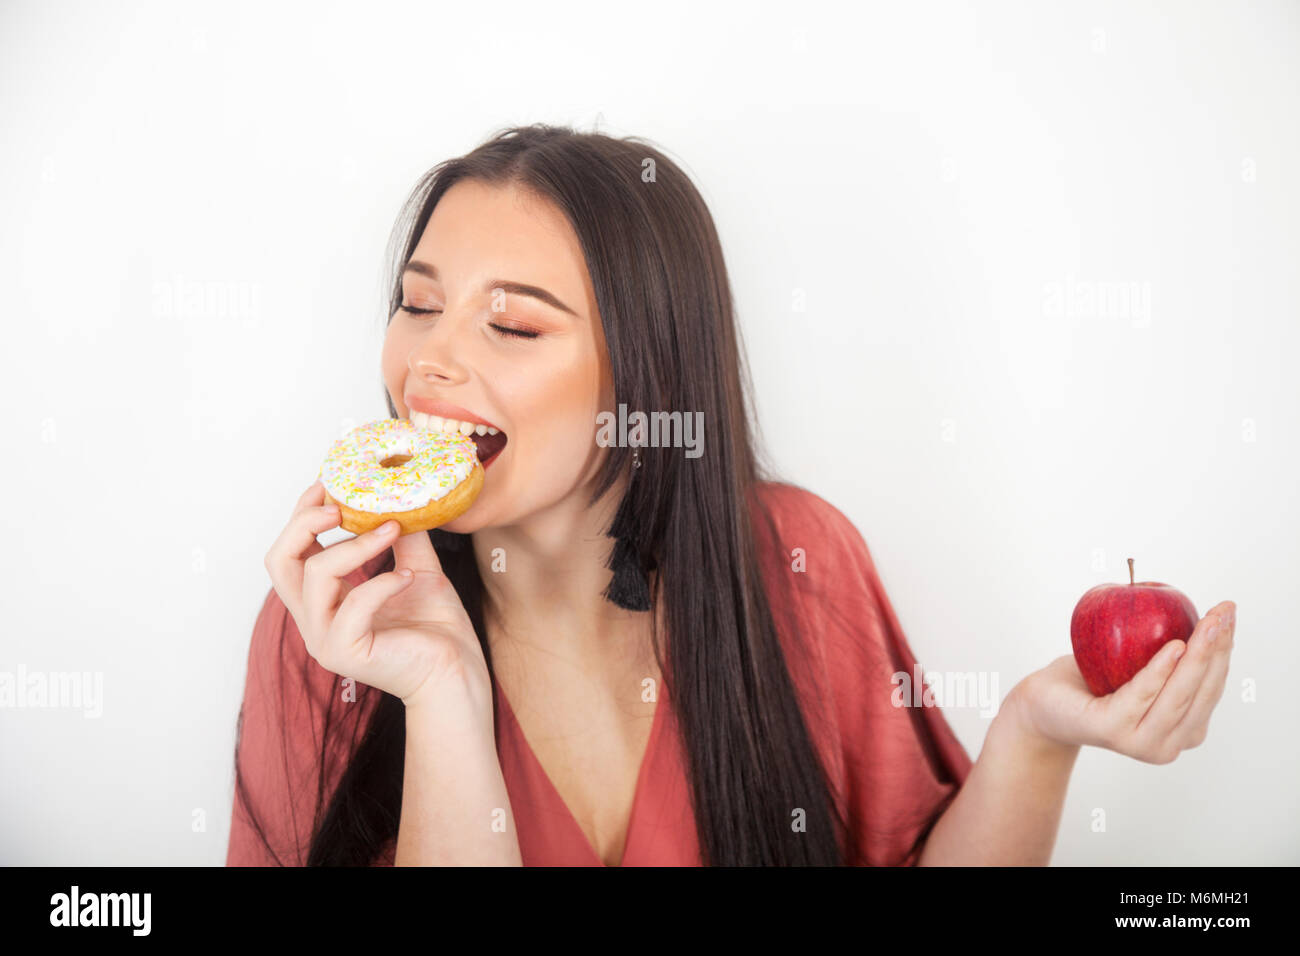 Pretty teenage girl taking a bite out of a donut and holding an apple in her hand. Stock Photo